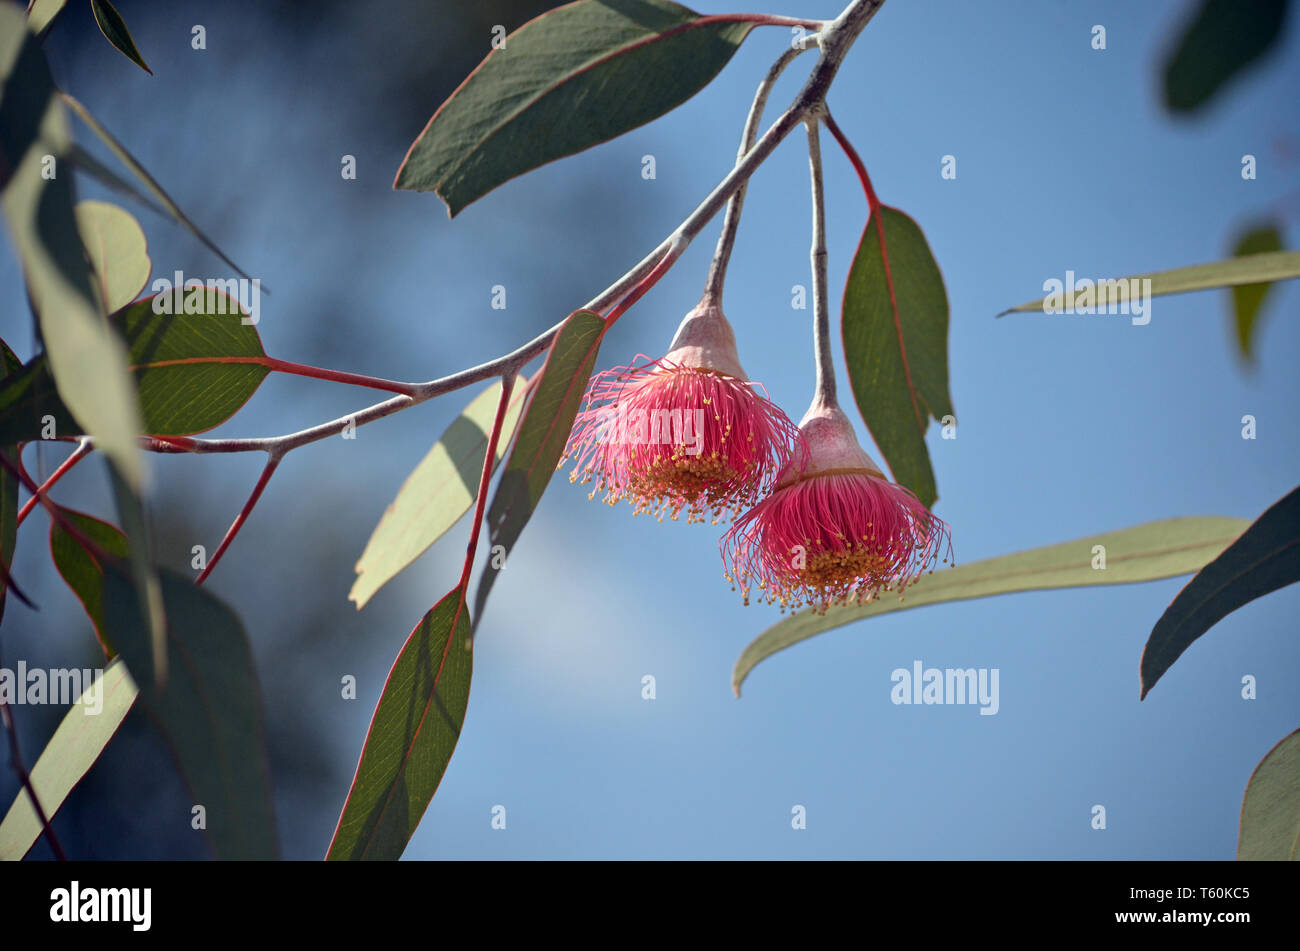 Two pink blossoms of the Australian native mallee tree Eucalyptus caesia, subspecies magna, family Myrtaceae, under a blue sky. Stock Photo